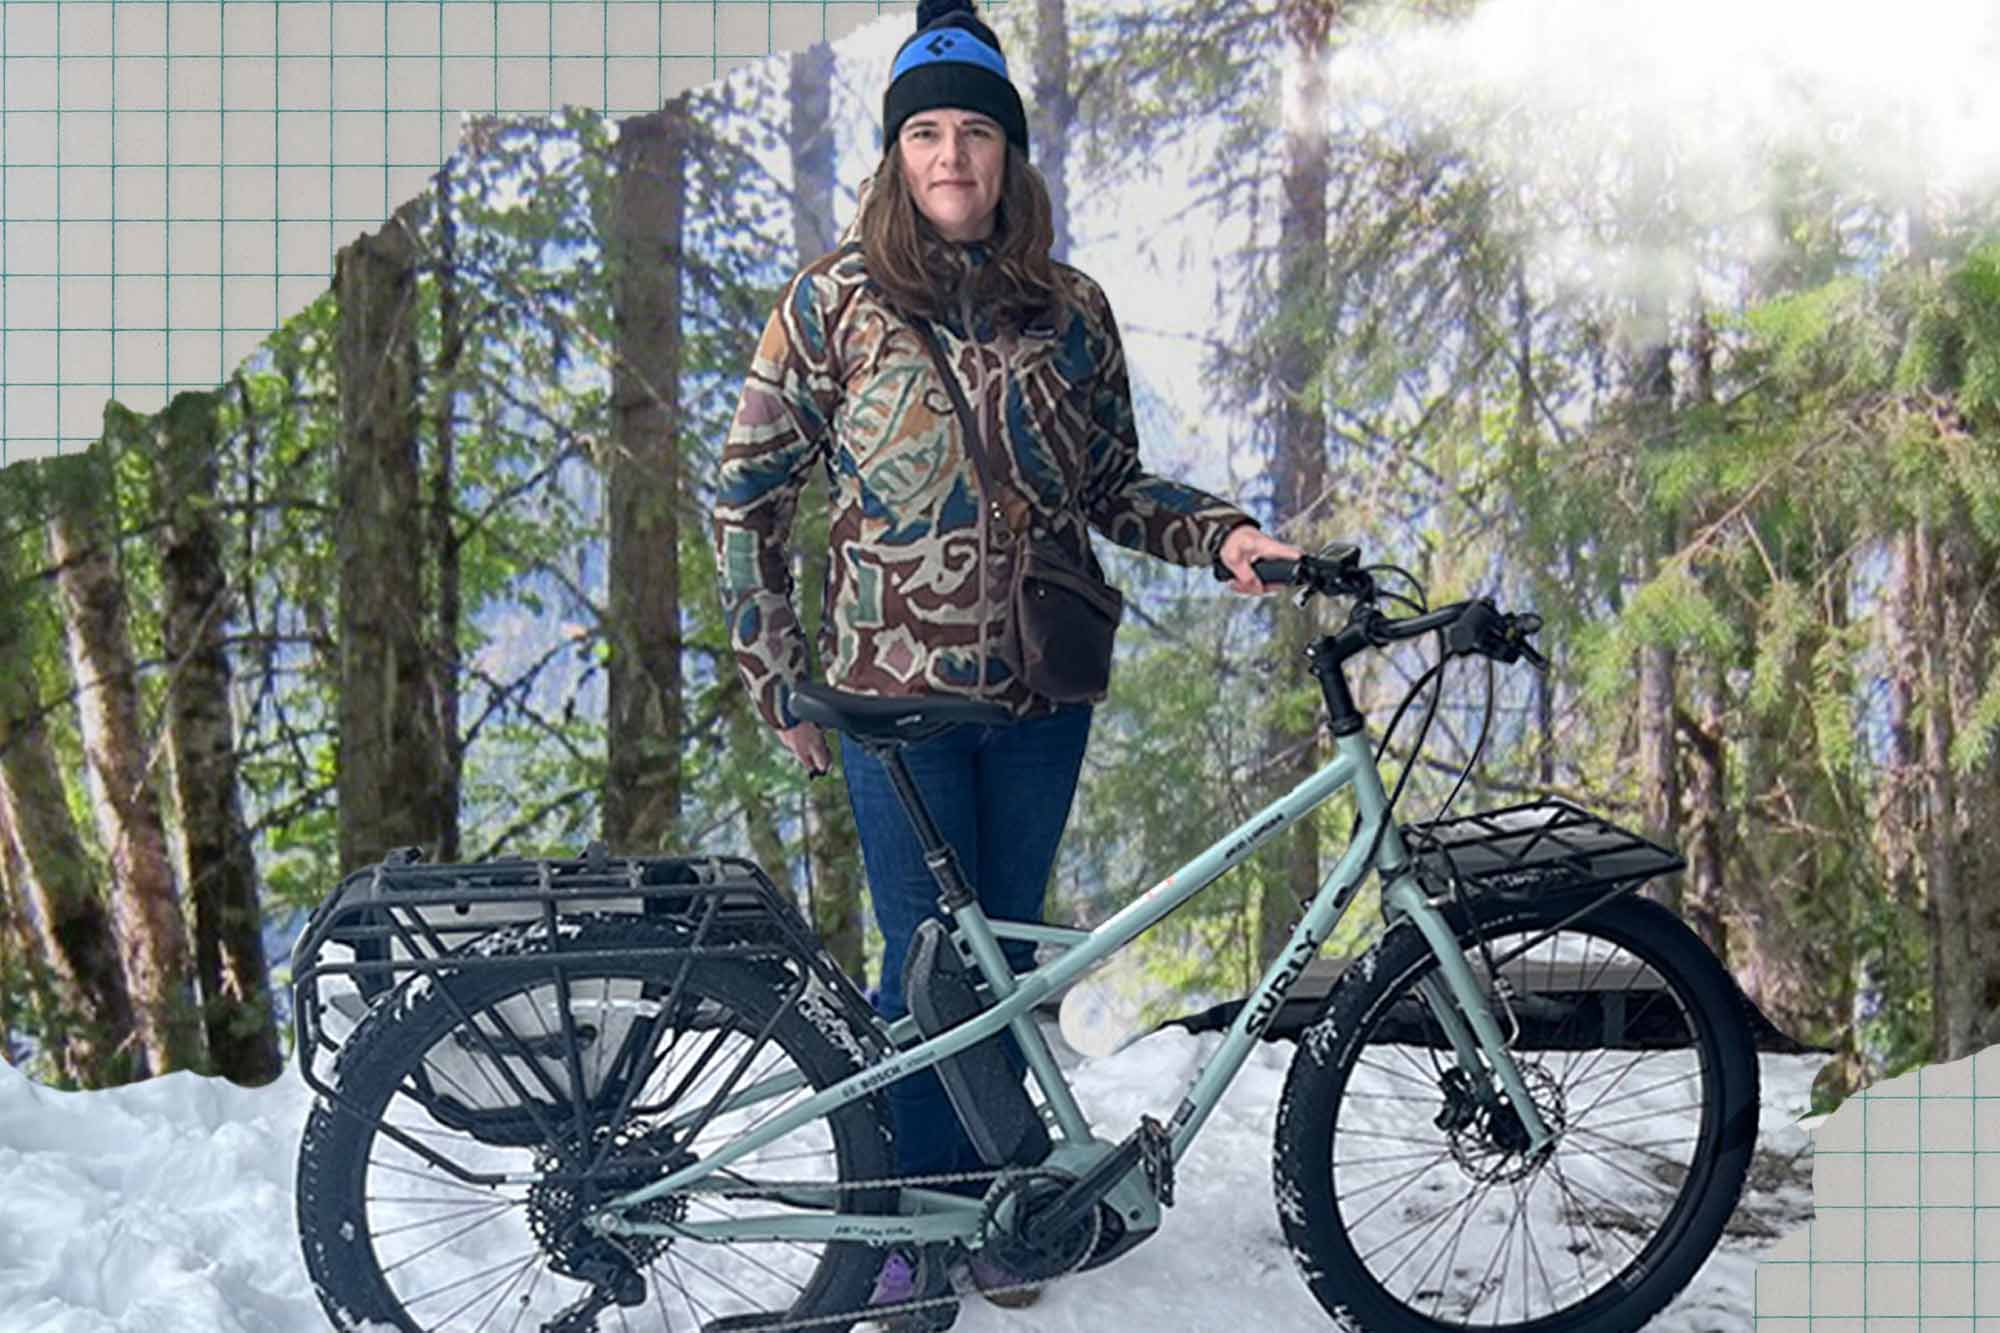 Athena standing with Surly Skid Loader Cargo Ebike